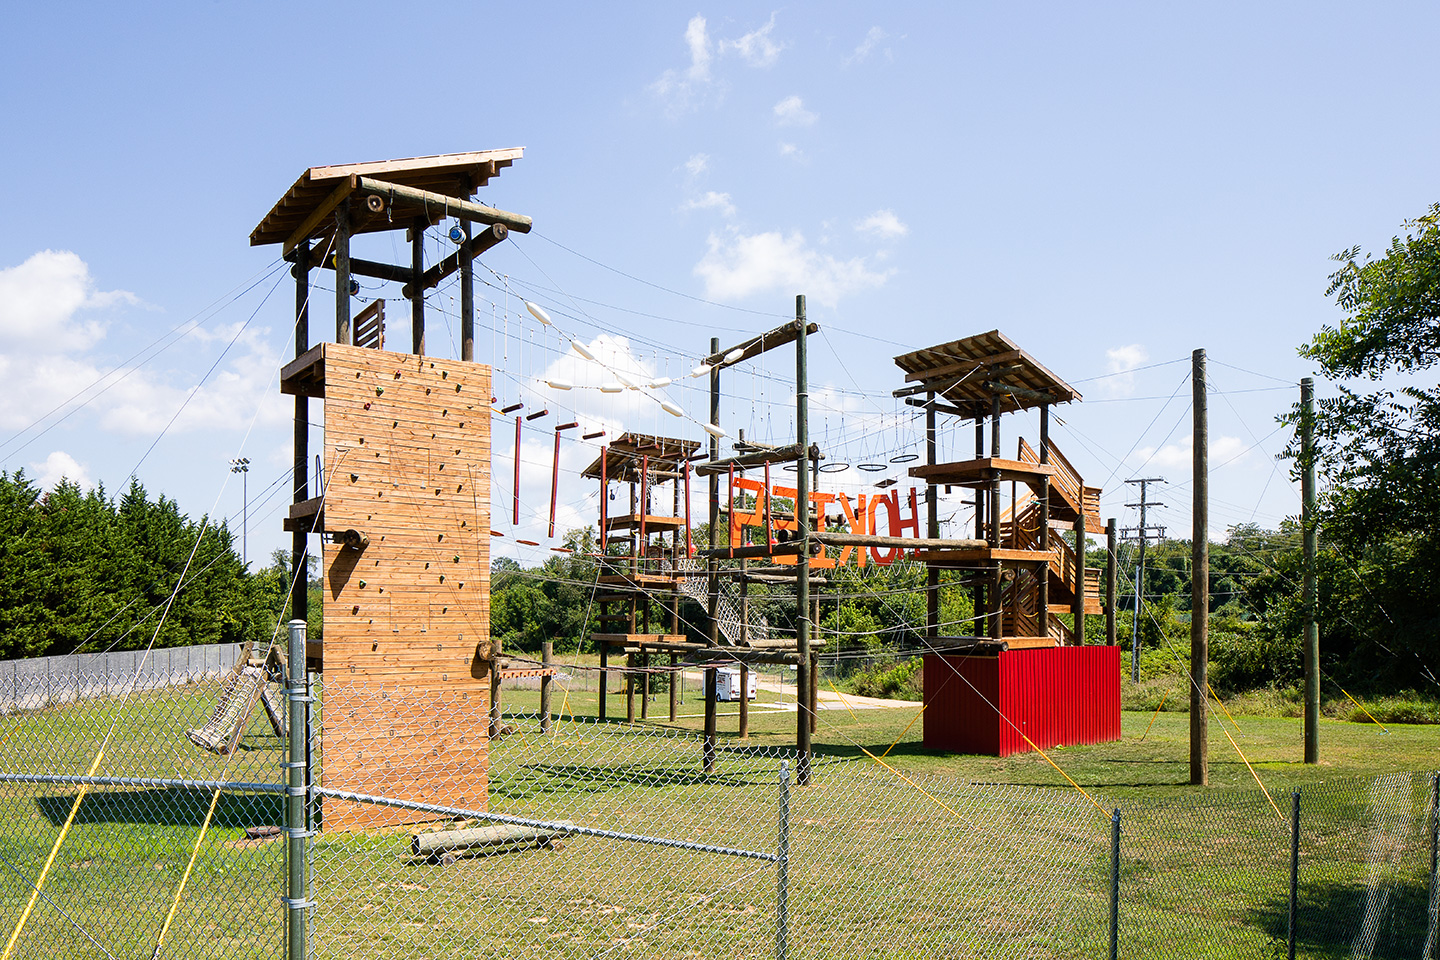 Dewberry provided design and construction administration services for a new challenge course located on Virginia Tech’s campus for intramural and recreational sports.